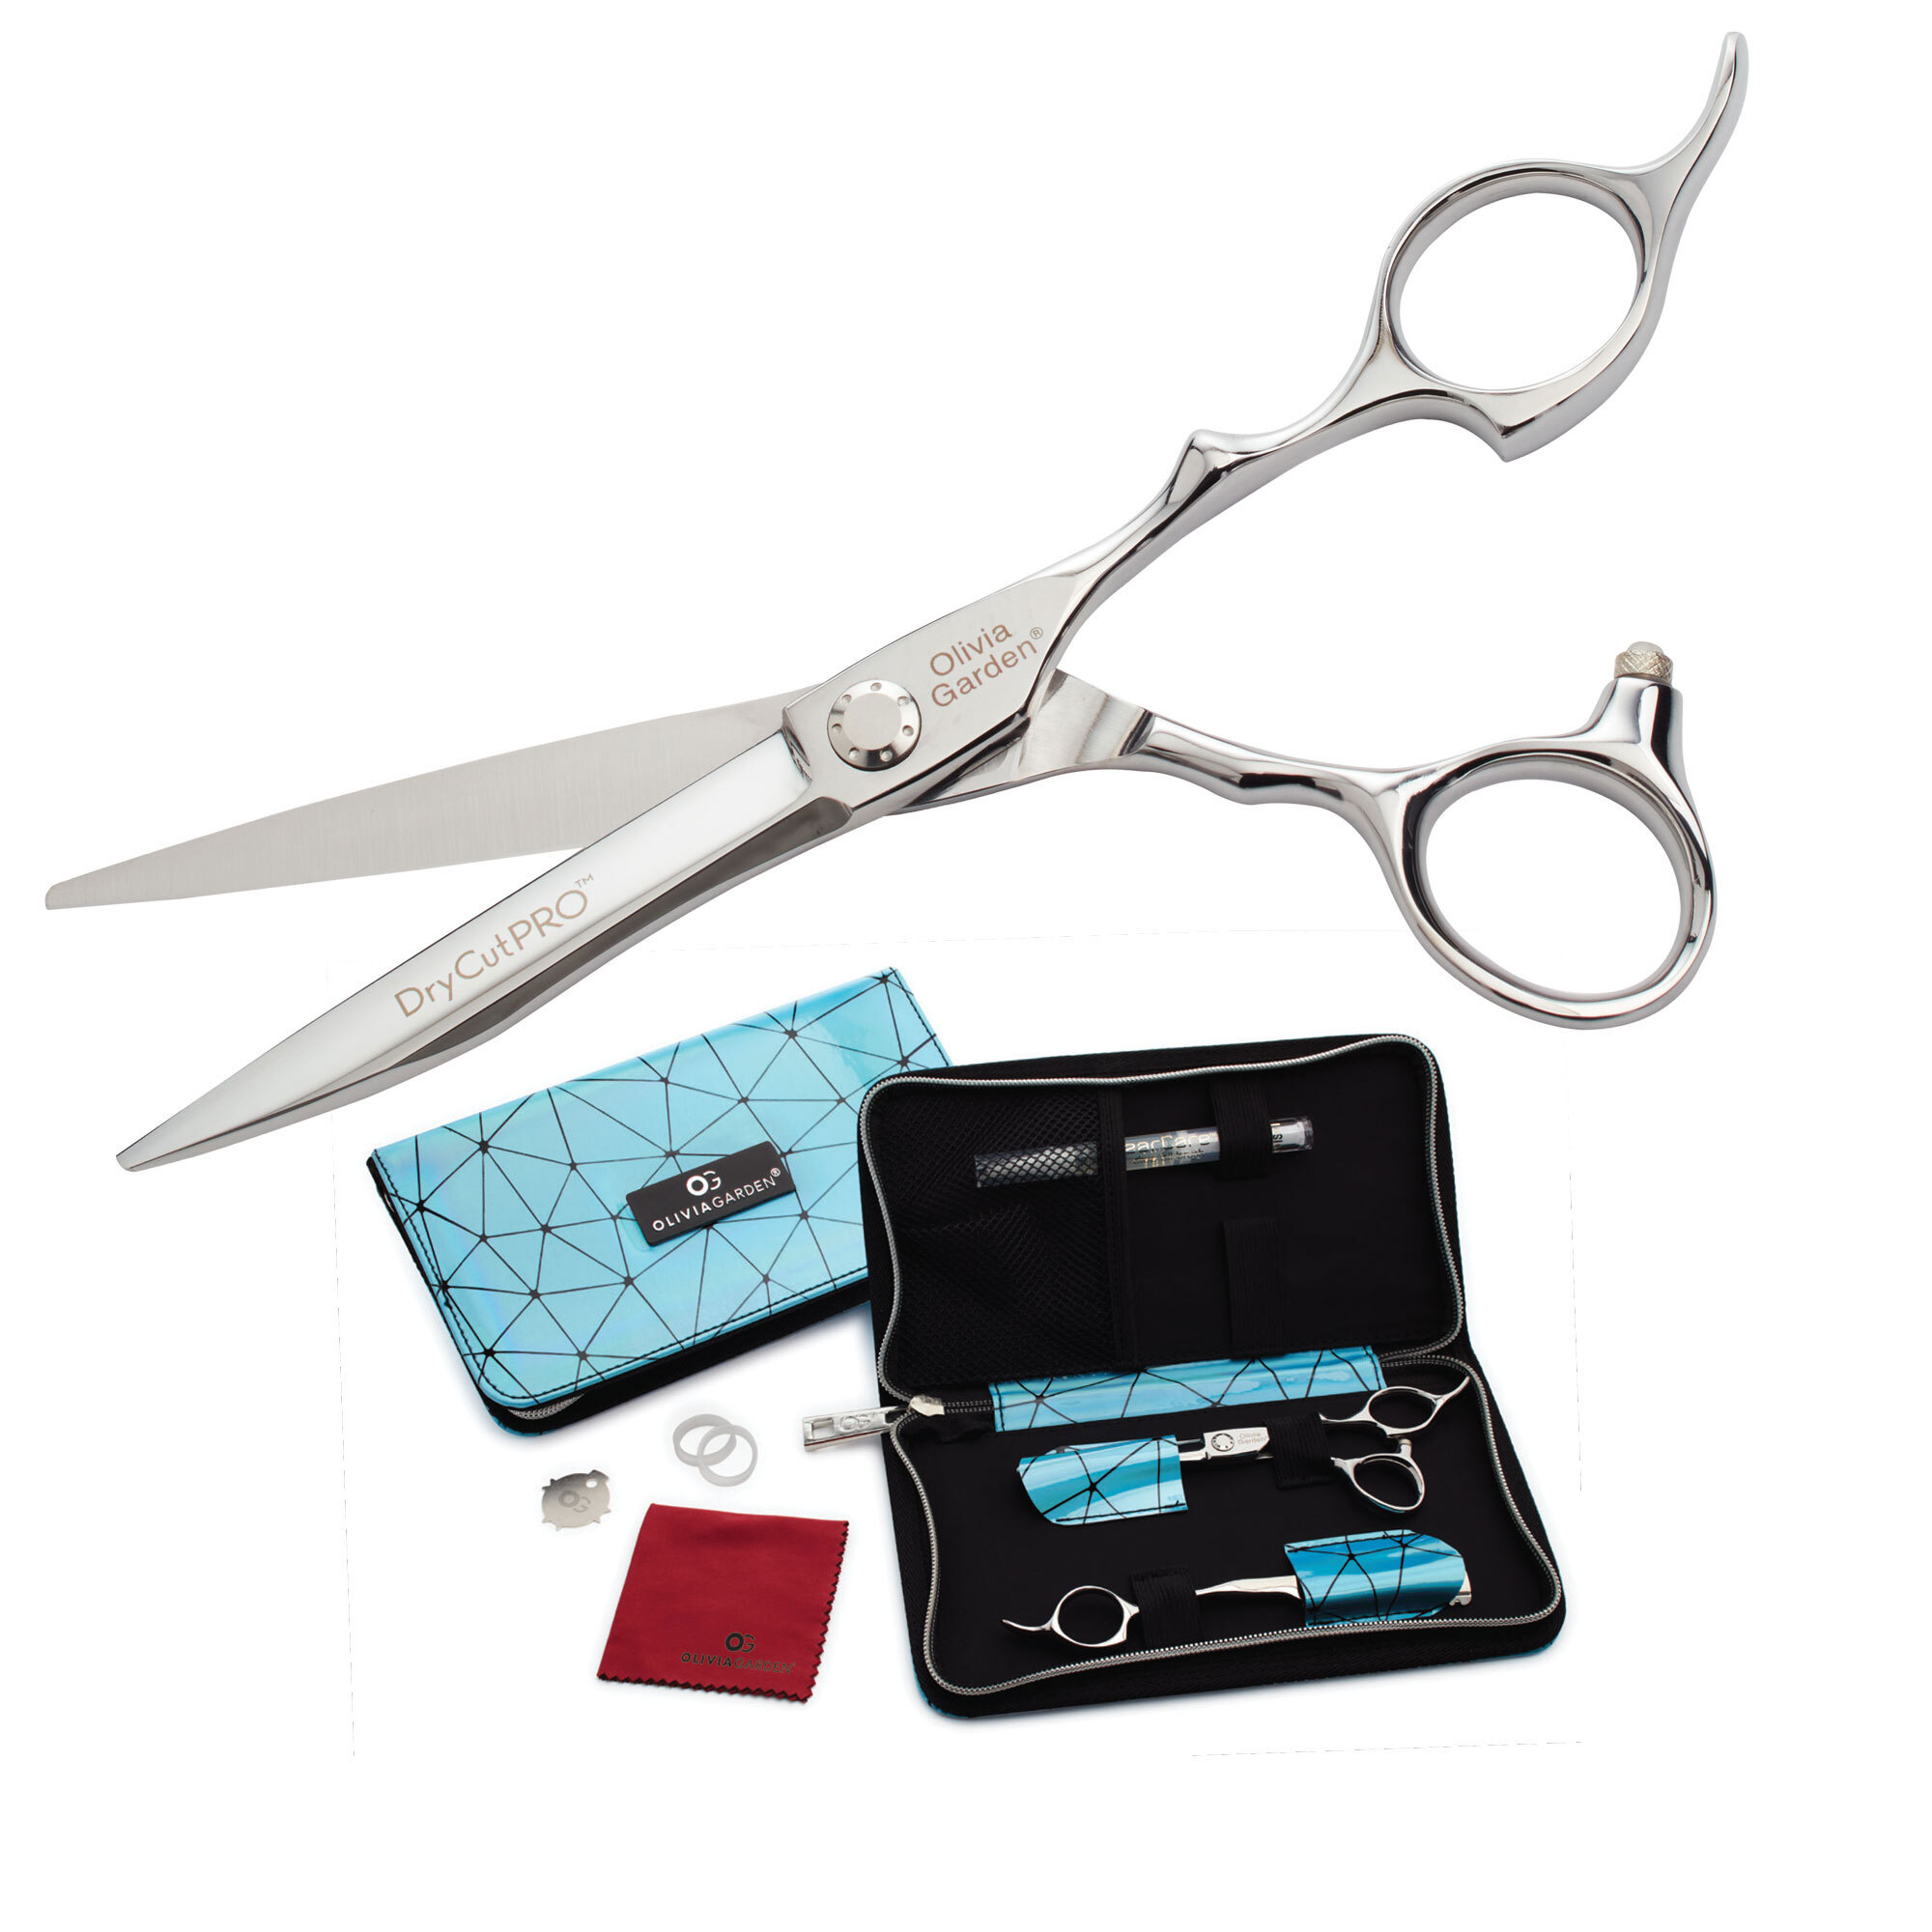 Straight Cut Hair Cutting Shears 5 and Thinners 6 by Olivia Garden at